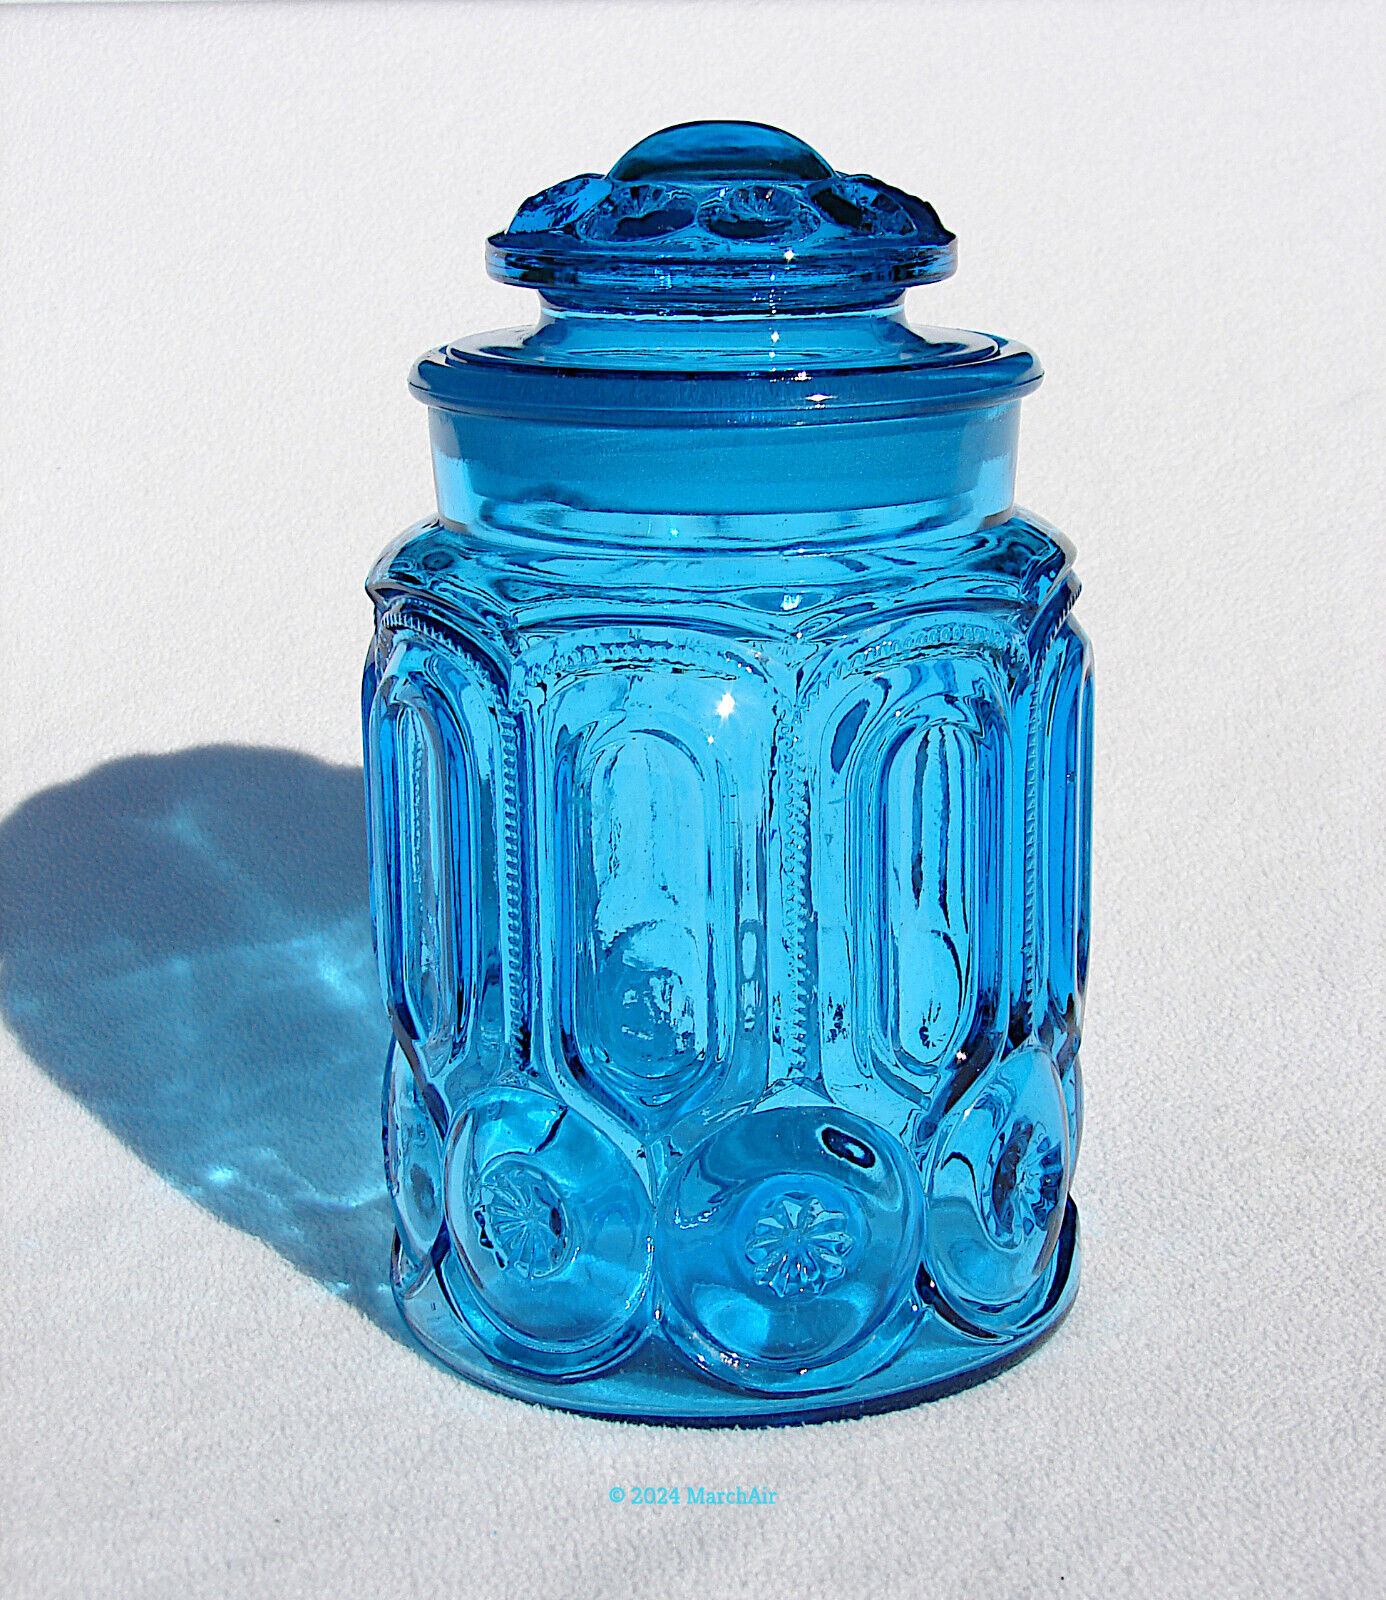 Moon & Star Canister Jar by L E Smith 9 1/2 inches Medium Tall Colonial Blue Jar